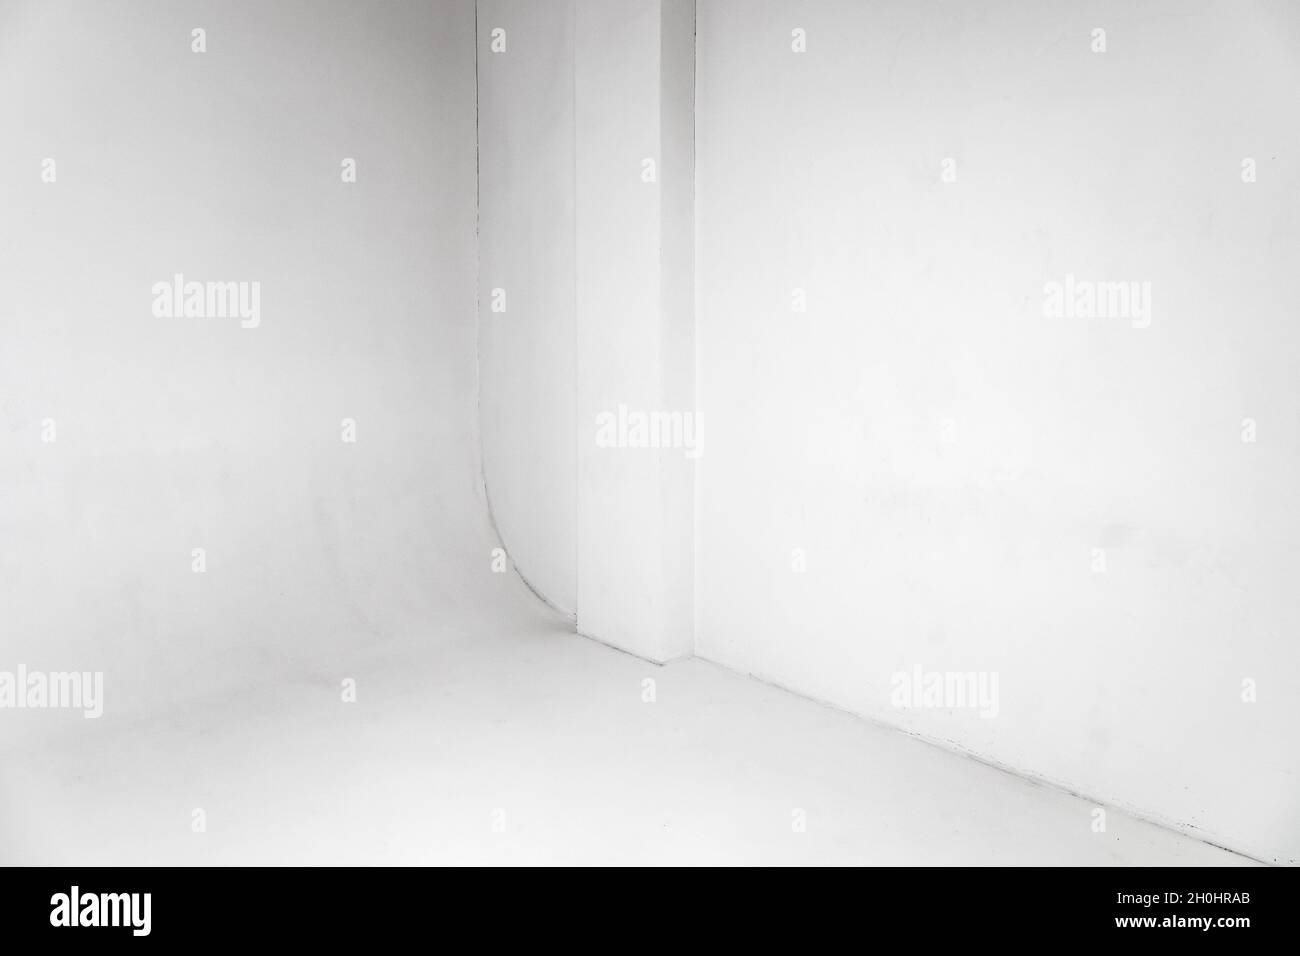 Abstract empty white photo studio interior background, cyclorama structure with smooth transition between horizontal and vertical planes Stock Photo